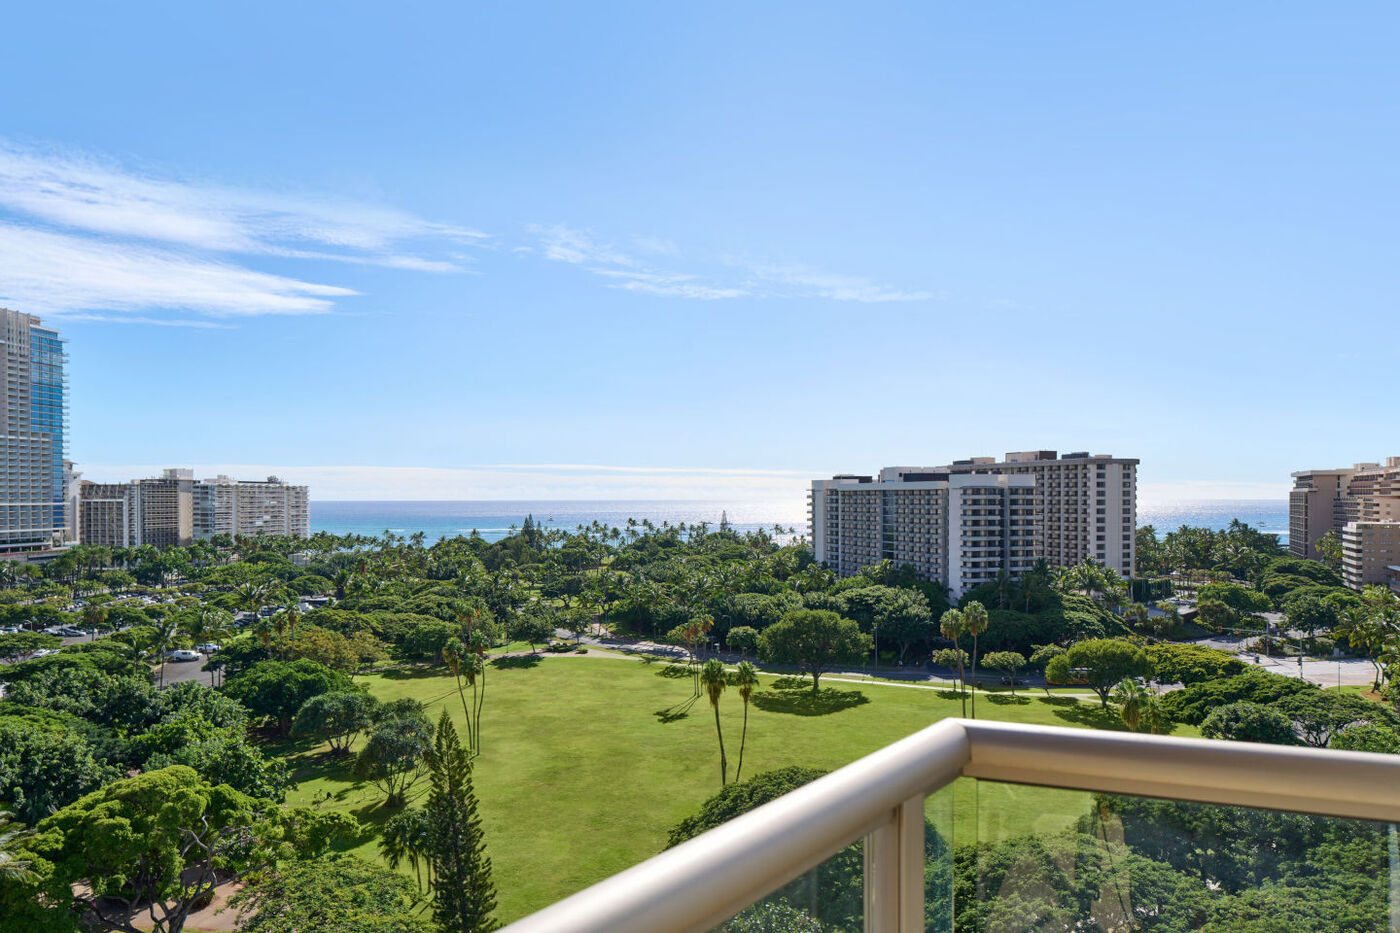 Balcony view of the park with green grass, and variety of trees, cityscape view, and pacific ocean in the horizon.